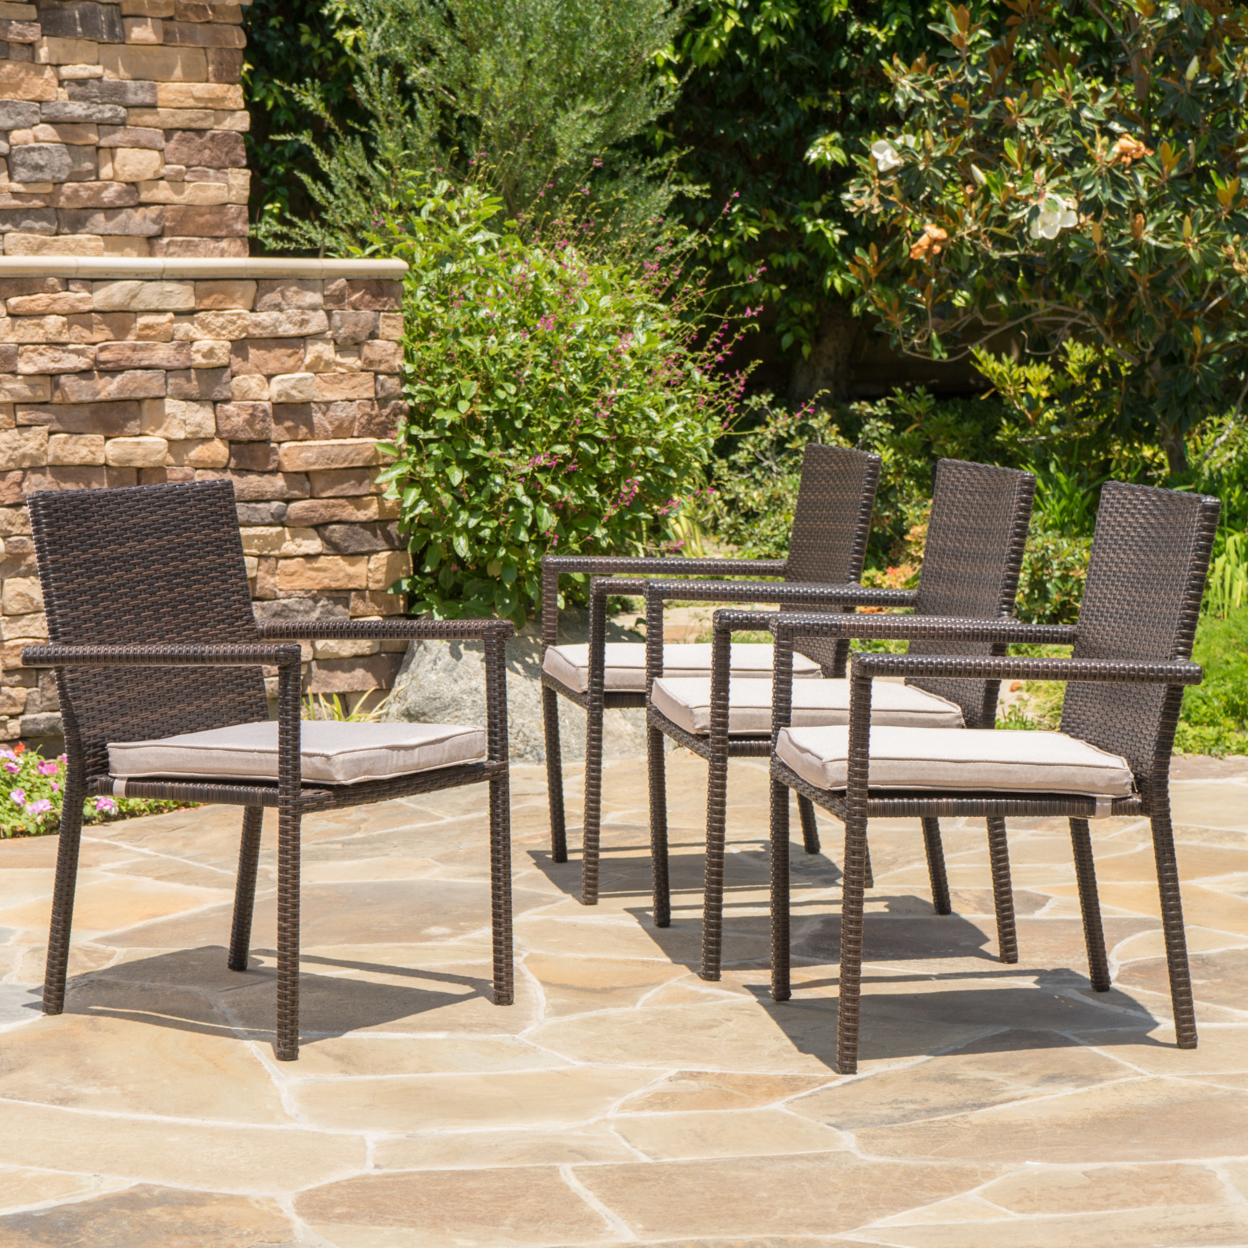 San Tropez Outdoor Dining Chairs With Water Resistant Cushions (Set Of 4) - Multi-brown/Textured Beige